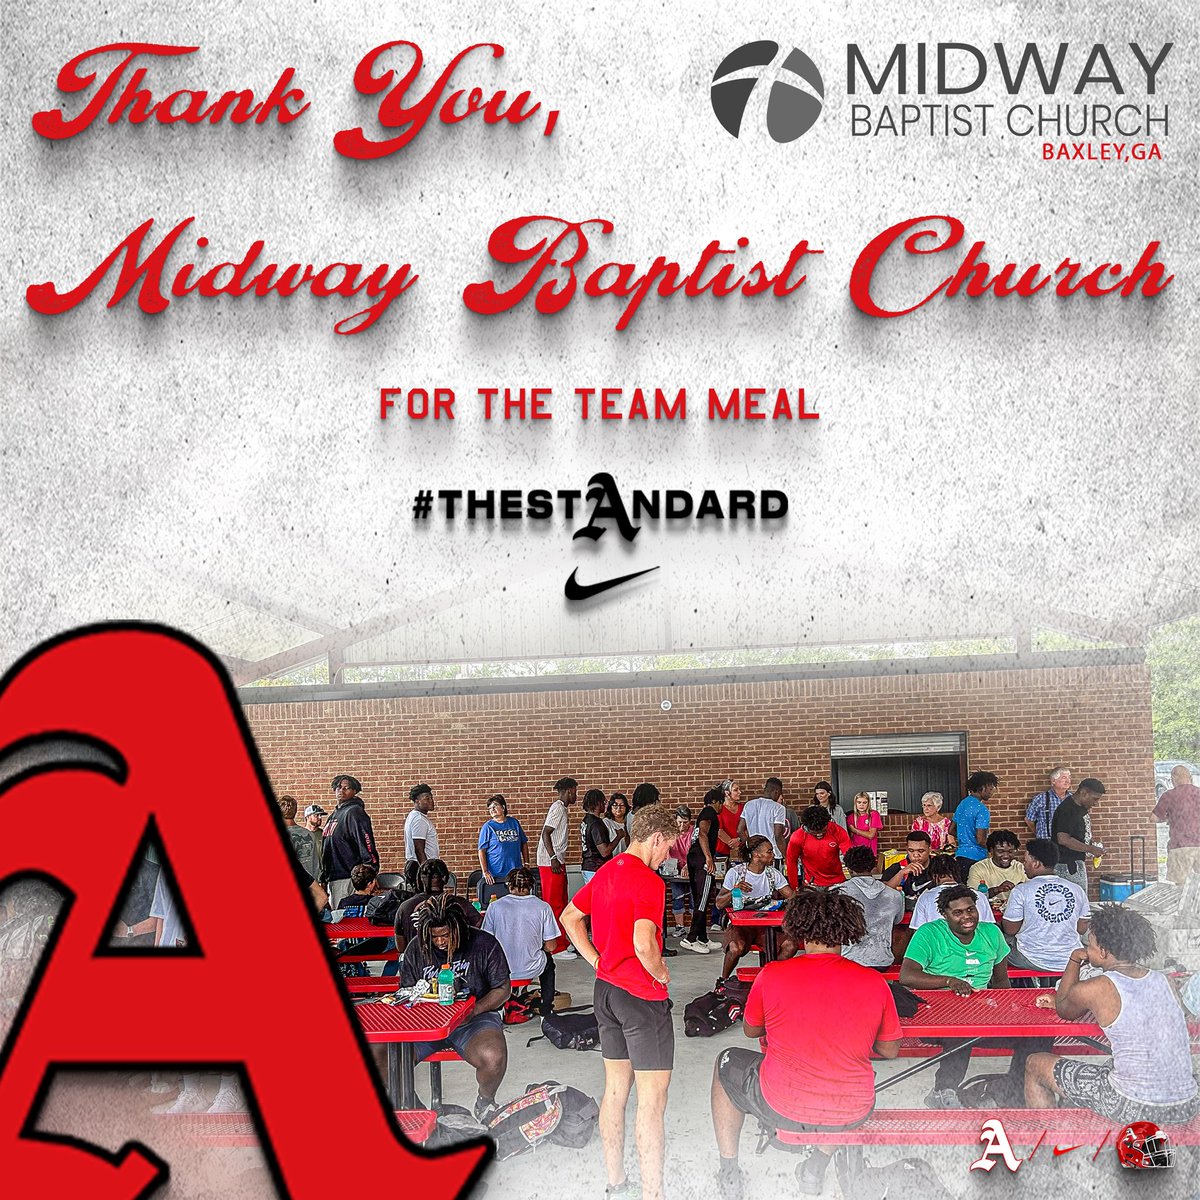 Want to take the time to give a huge Thank You to Midway Baptist Church for our delicious Post Practice meal! #TheStandard 🏴‍☠️🏴‍☠️🏴‍☠️